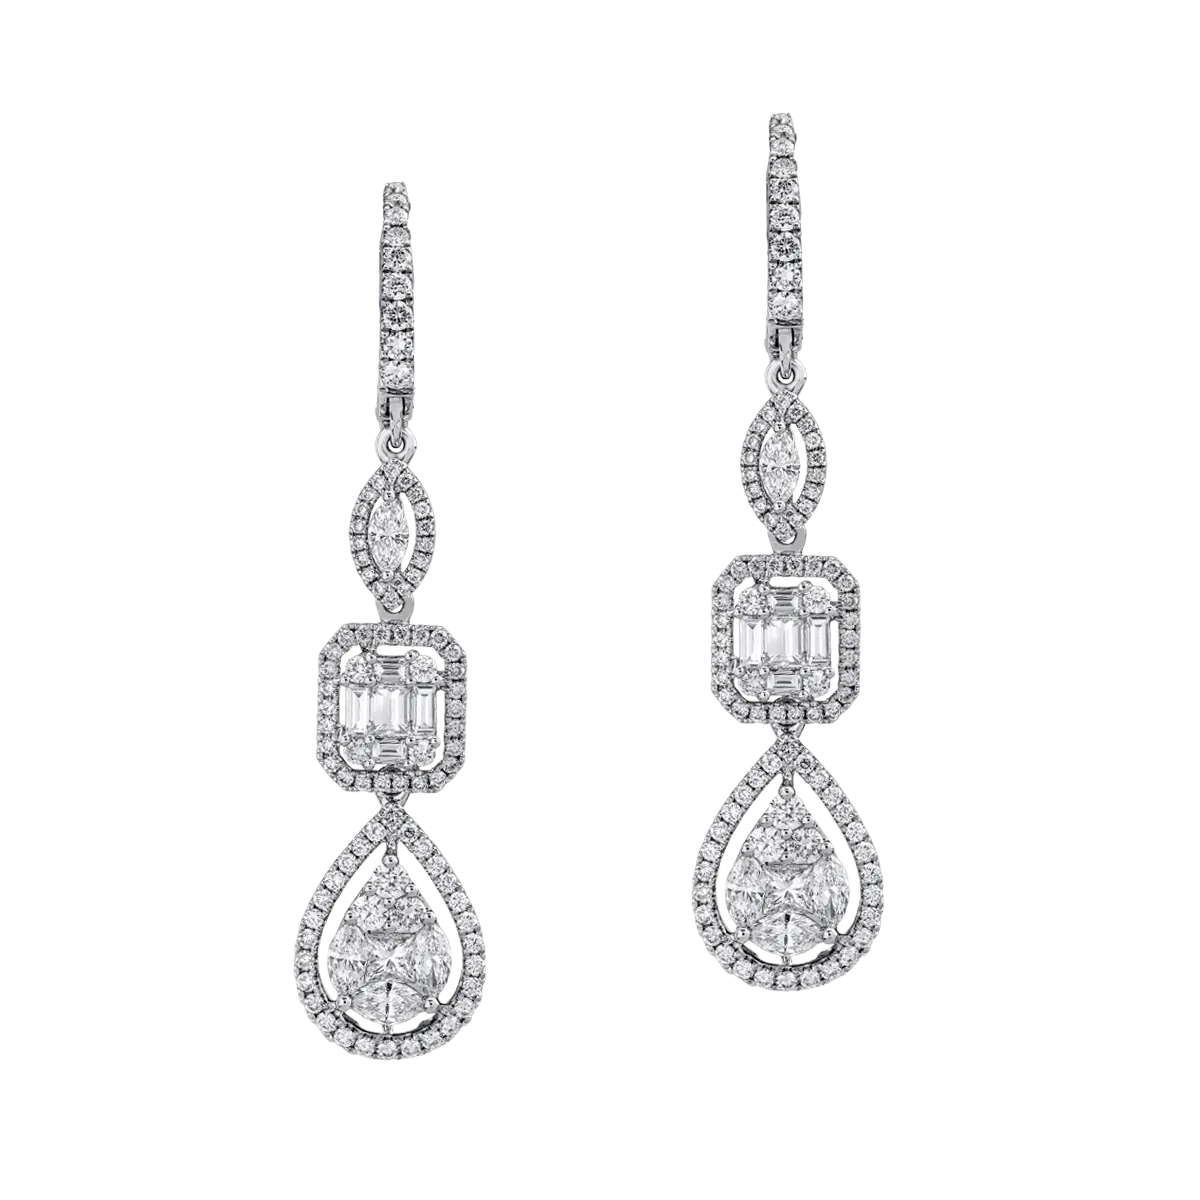 18K white gold earrings with 2.63ct diamonds